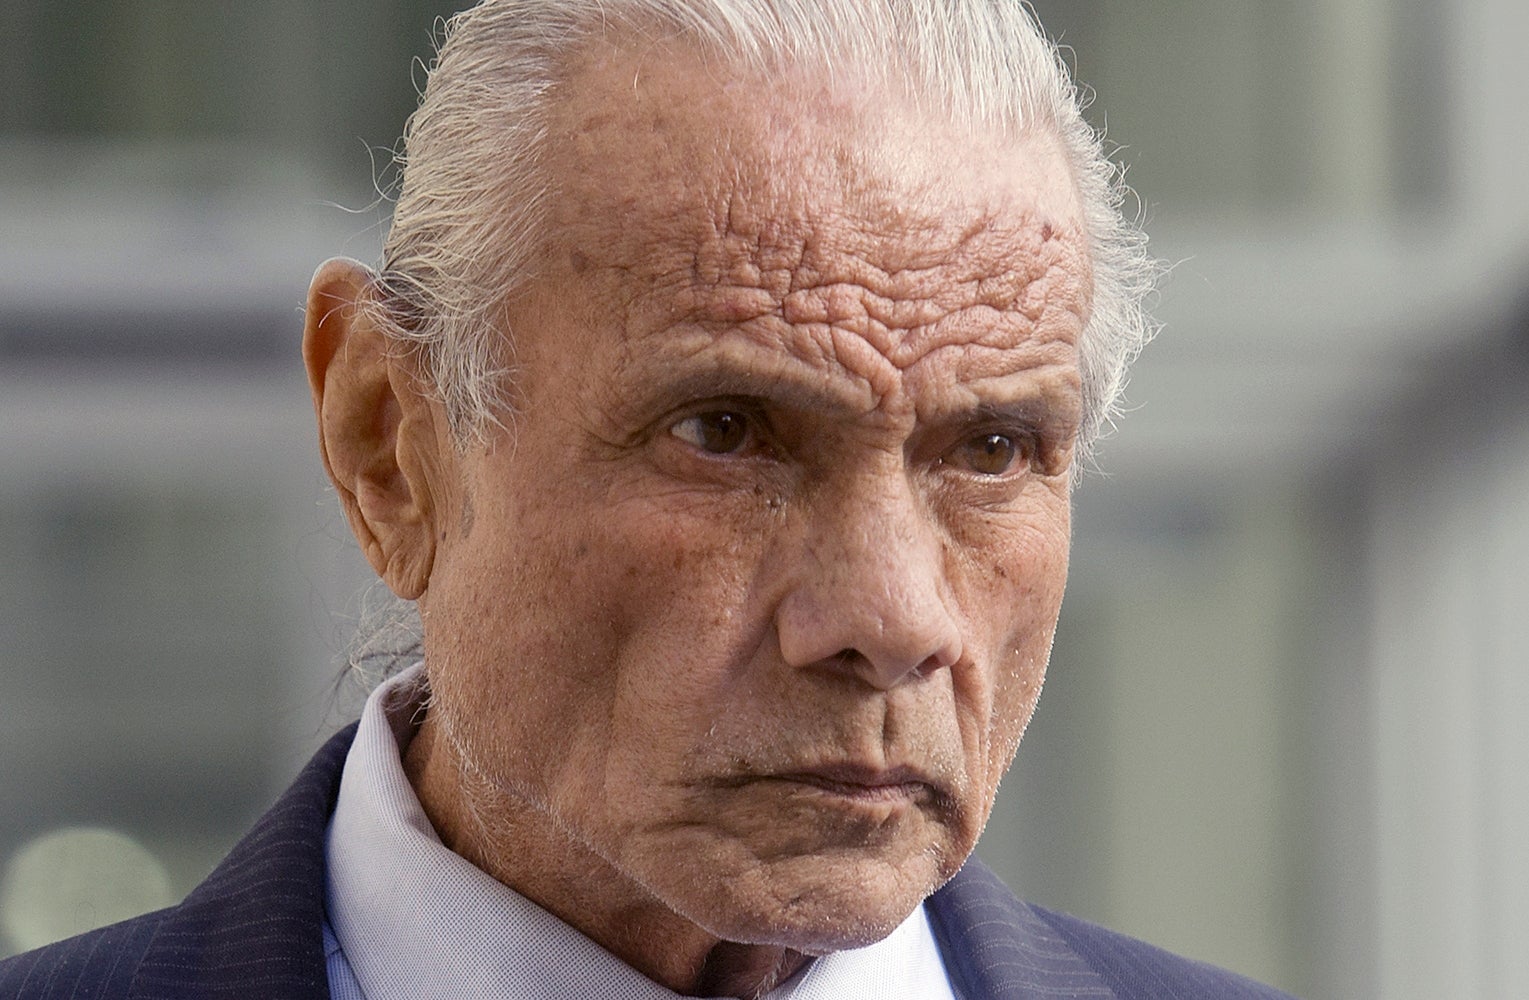 File Image: In this 2 November, 2015, file photo, former professional wrestler Jimmy "Superfly" Snuka leaves after his formal arraignment at the Lehigh County Courthouse in Allentown, Pa. Snuka is among dozens of former pro wrestlers who filed lawsuits accusing World Wrestling Entertainment of failing to protect them from repeated head injuries. Several of the wrestlers are now taking their cases to the U.S. Supreme Court